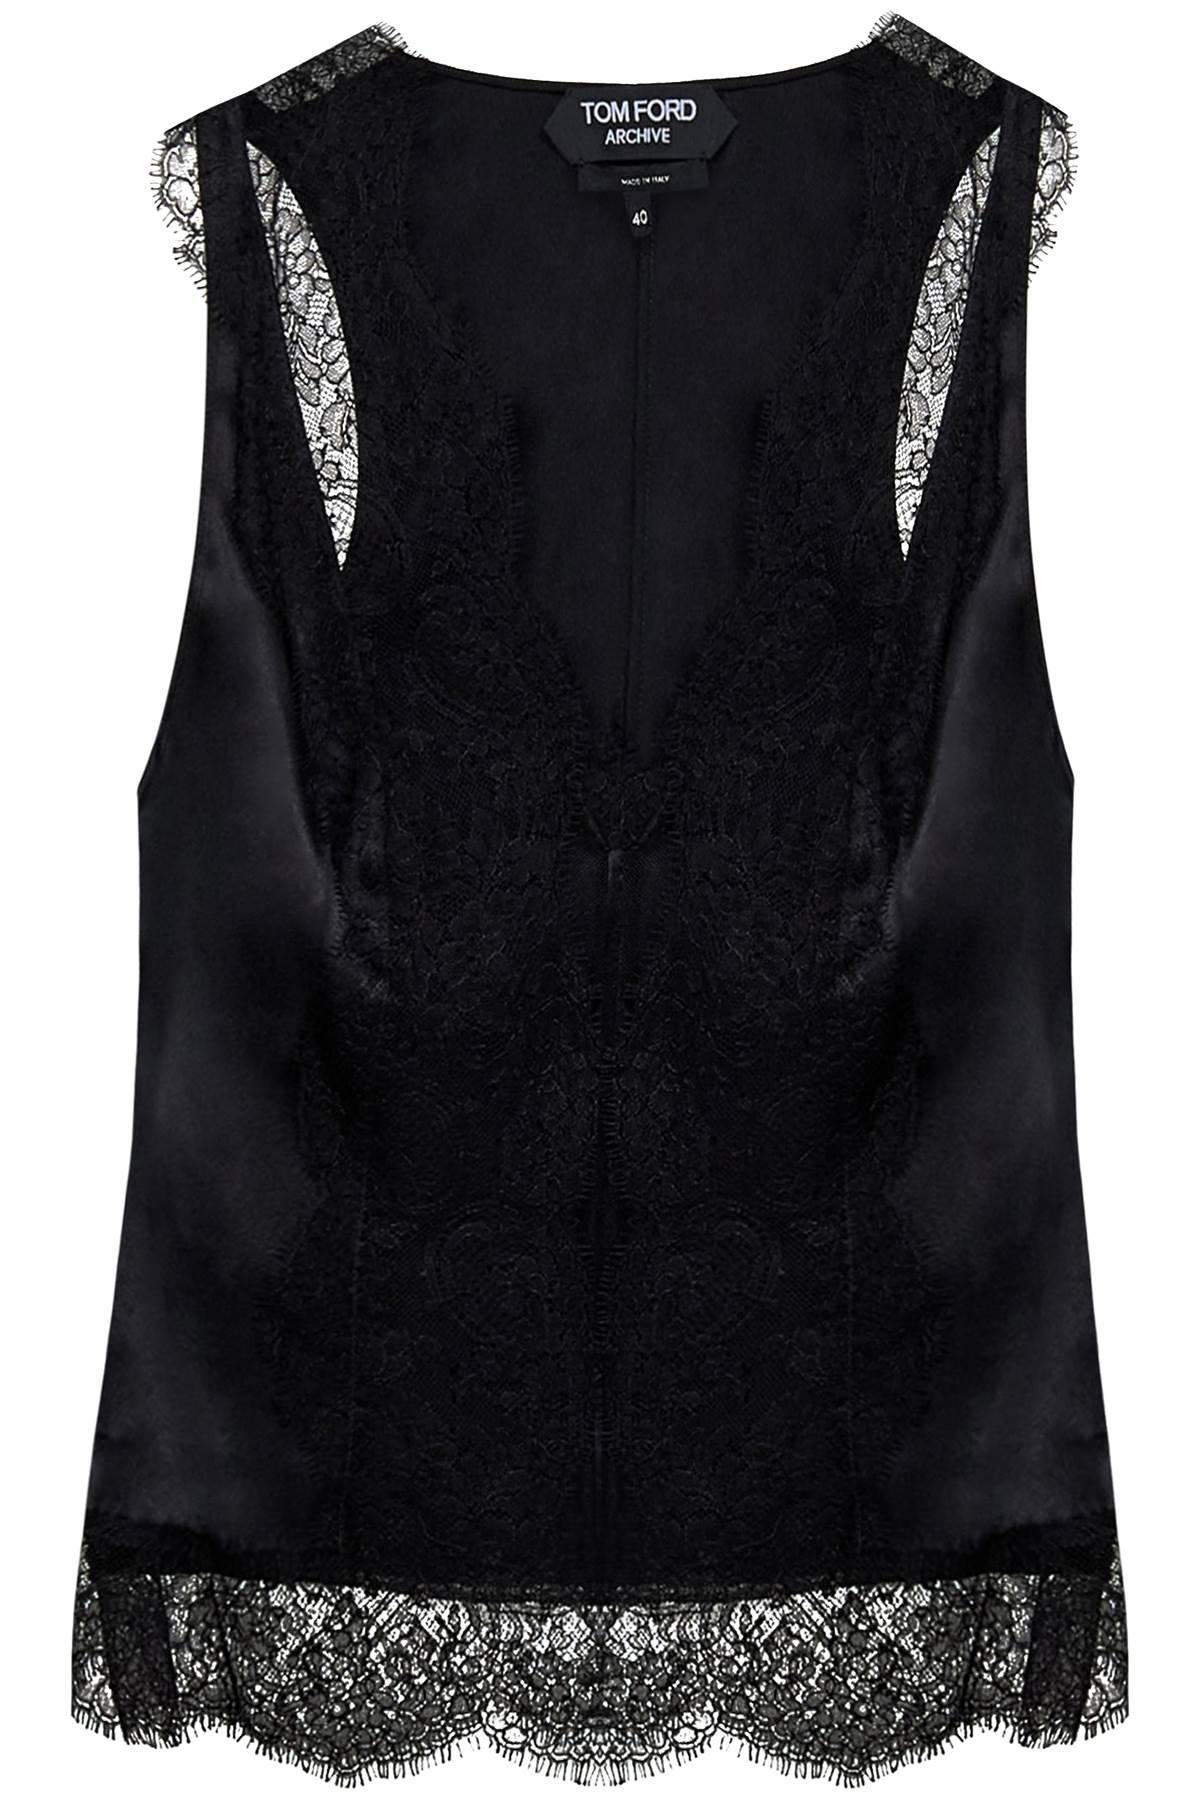 Shop Tom Ford Satin Tank Top With Chantilly Lace In Black